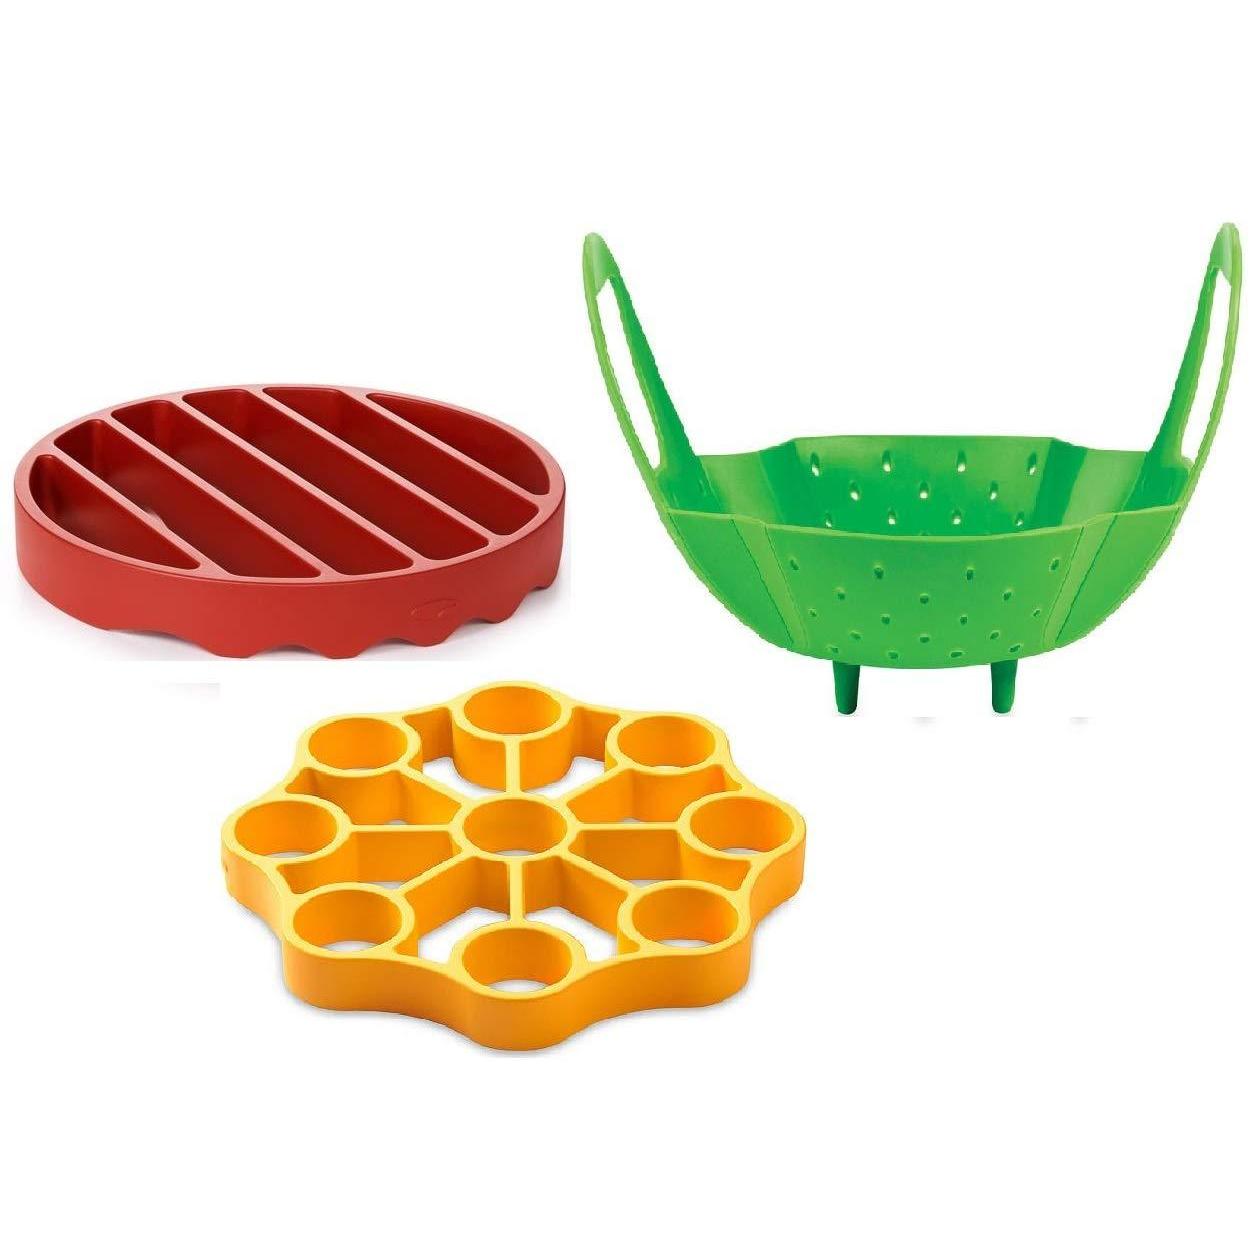 Silicone Pressure Cooker Piece Egg Steamer Basket Cooking Rack, Red Yellow Green Insta-Pot Accesorie - UproMax